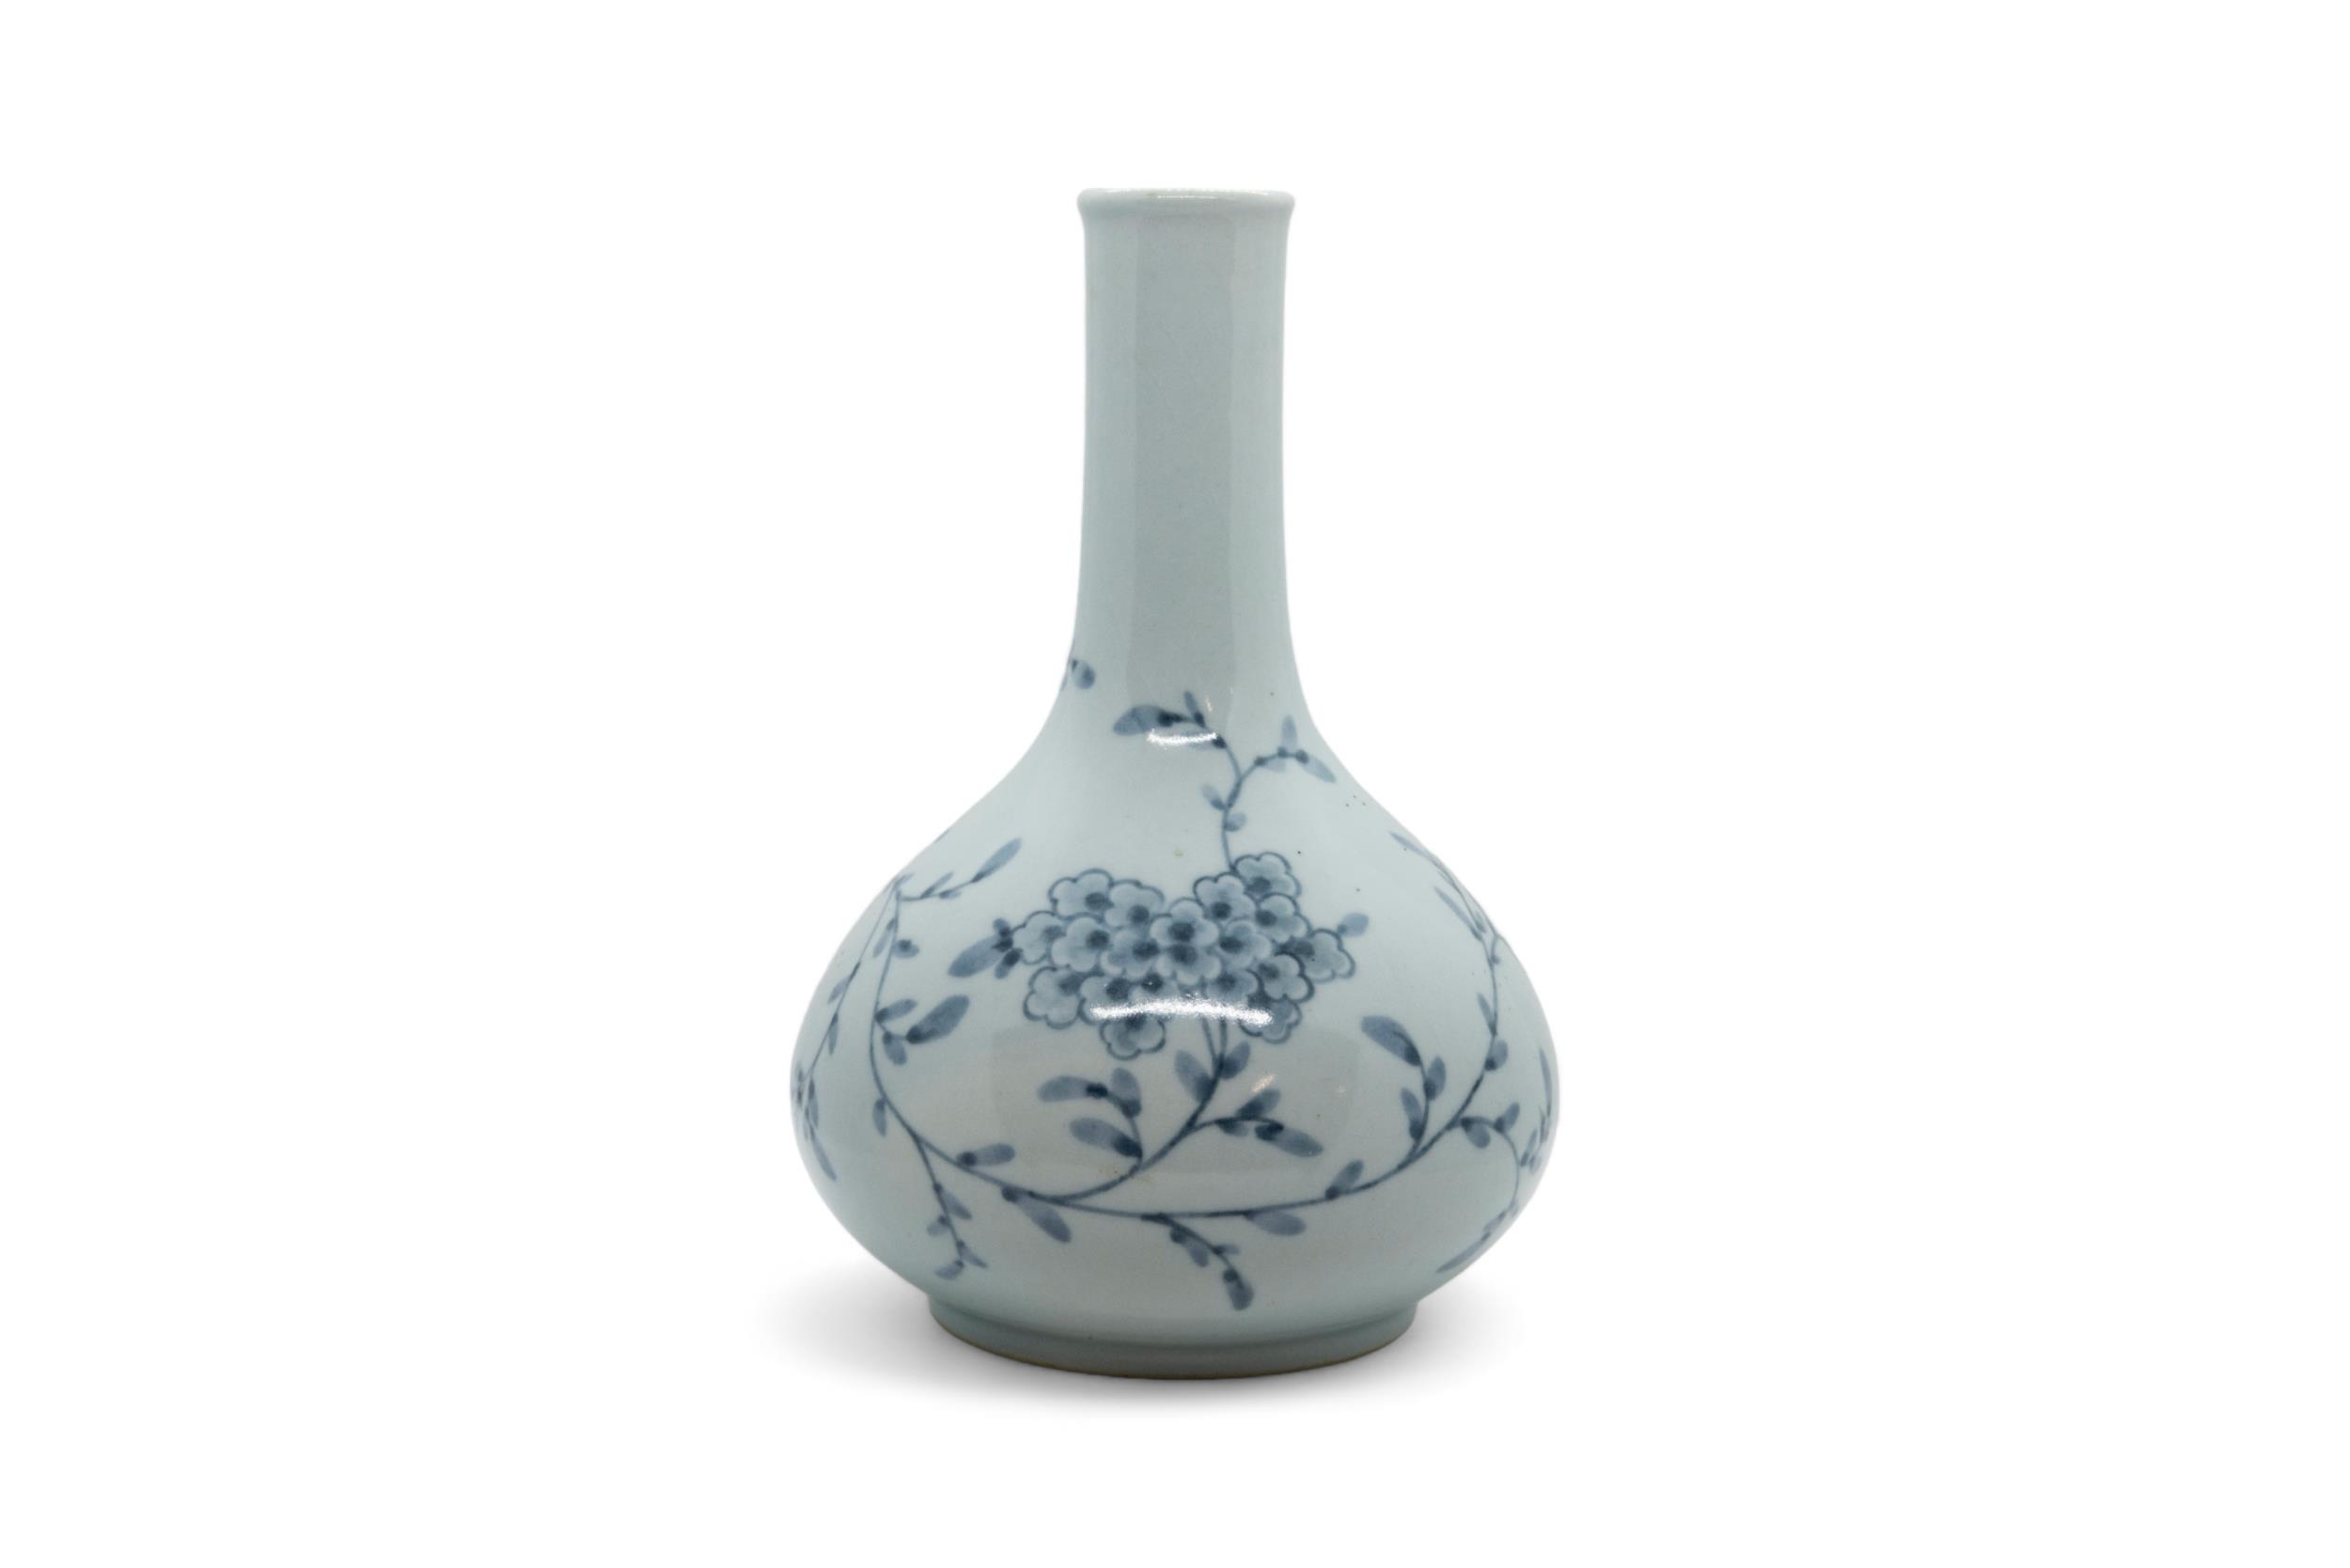 A GROUP OF FIVE JAPANESE PORCELAIN VASES 19TH / 20TH CENTURY largest, 46cm high, smallest, 24cm - Image 3 of 9